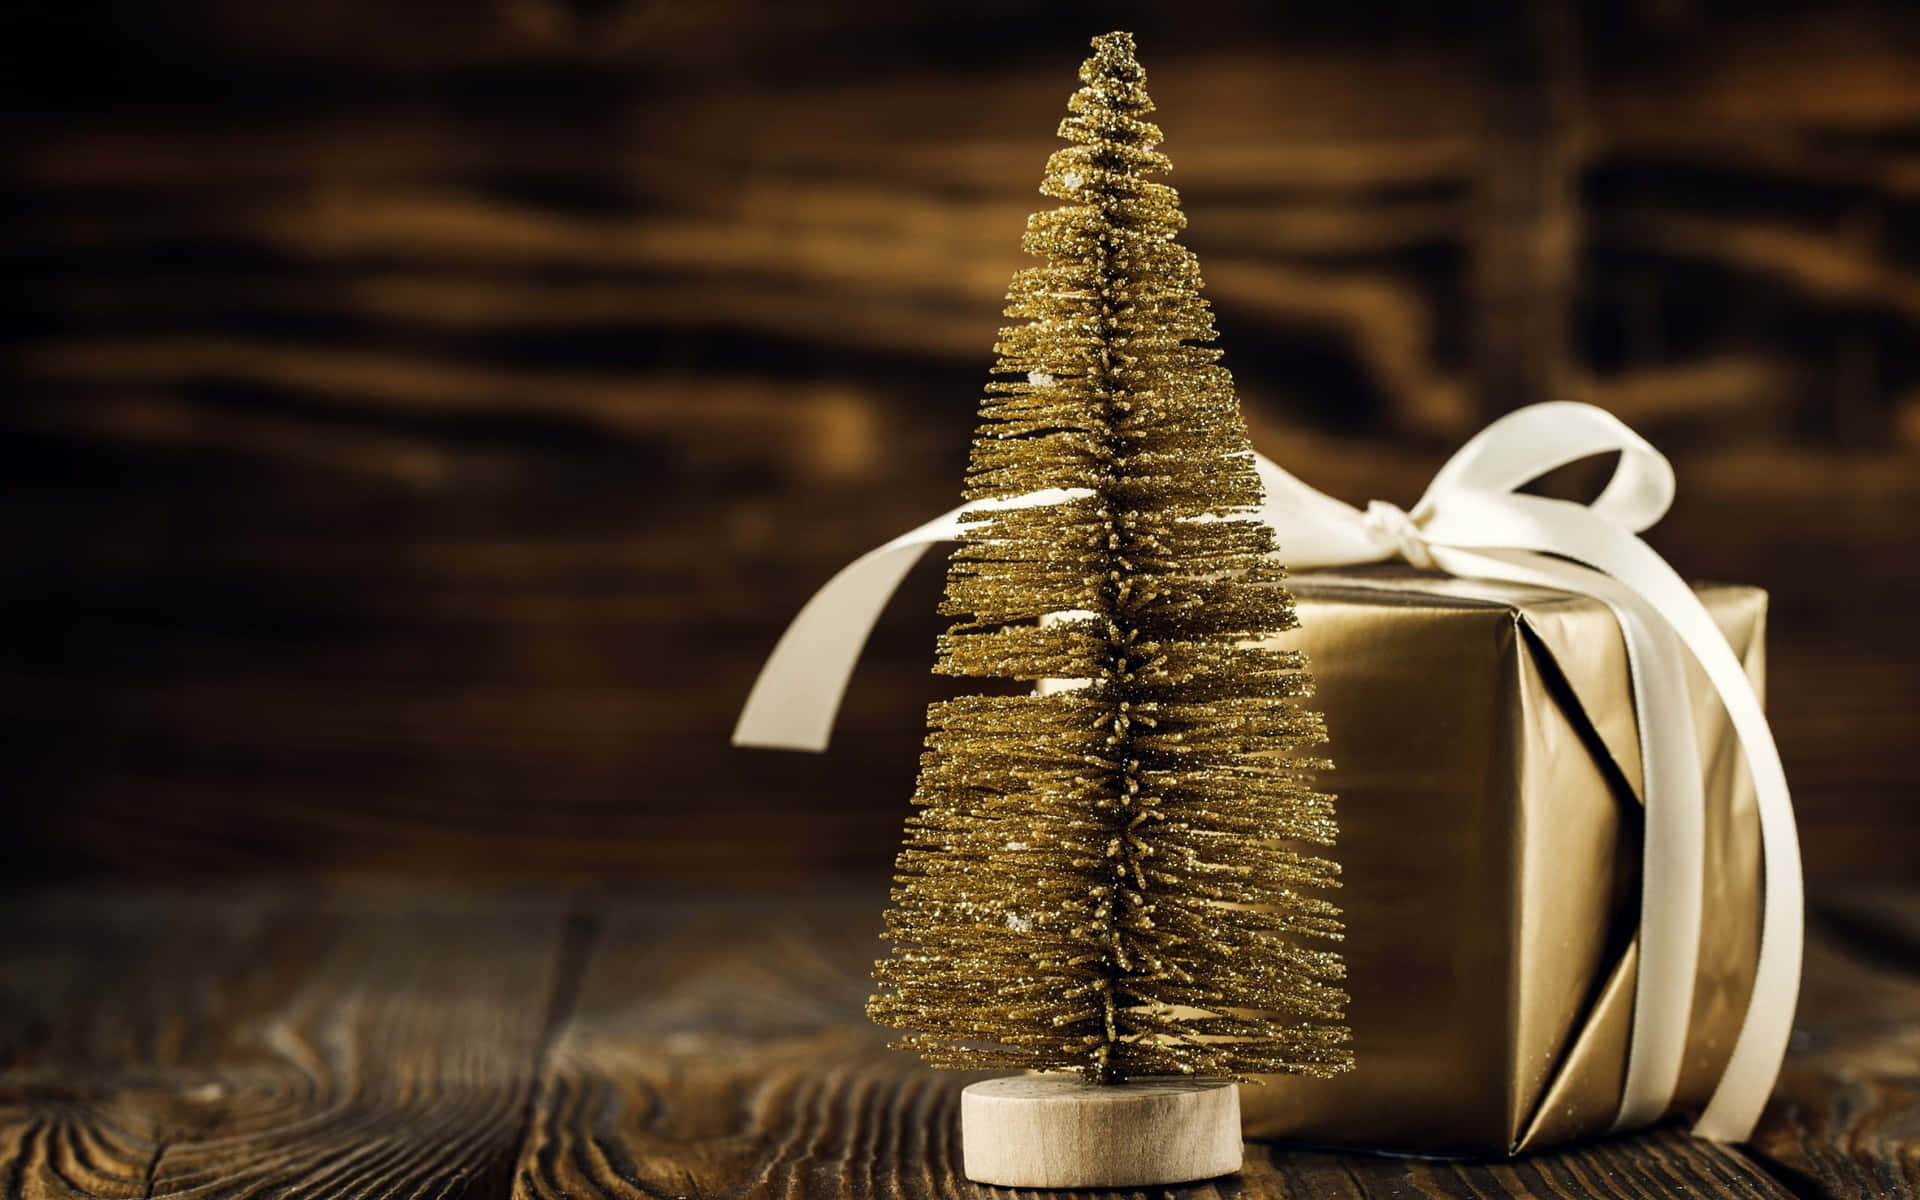 A Gold Gift Box With A Christmas Tree On A Wooden Table